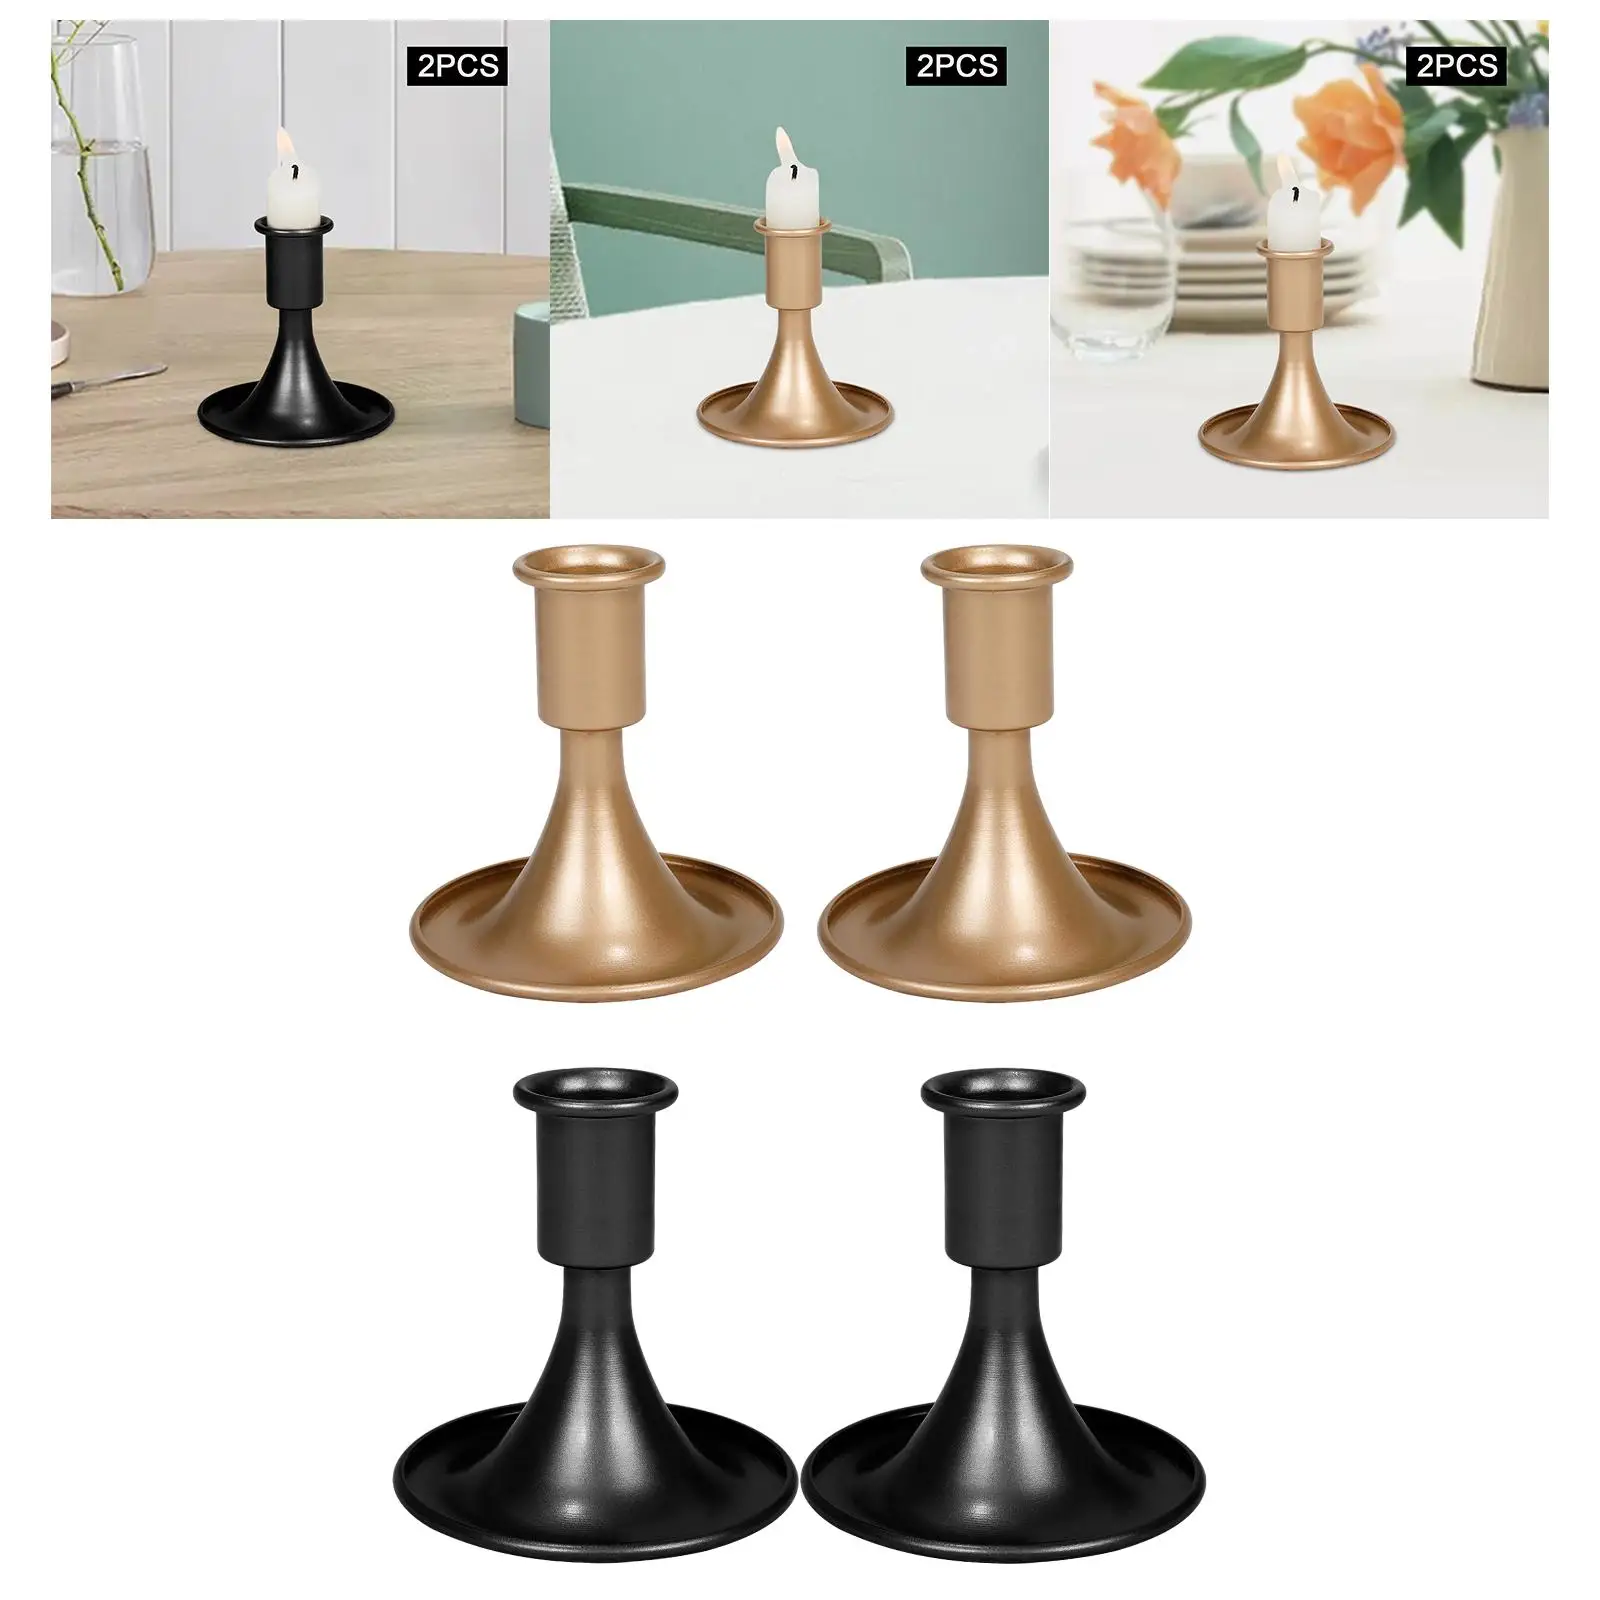 2x Pillar Candle Candlestick Holder Iron for Fireplace Festivals Dining Room